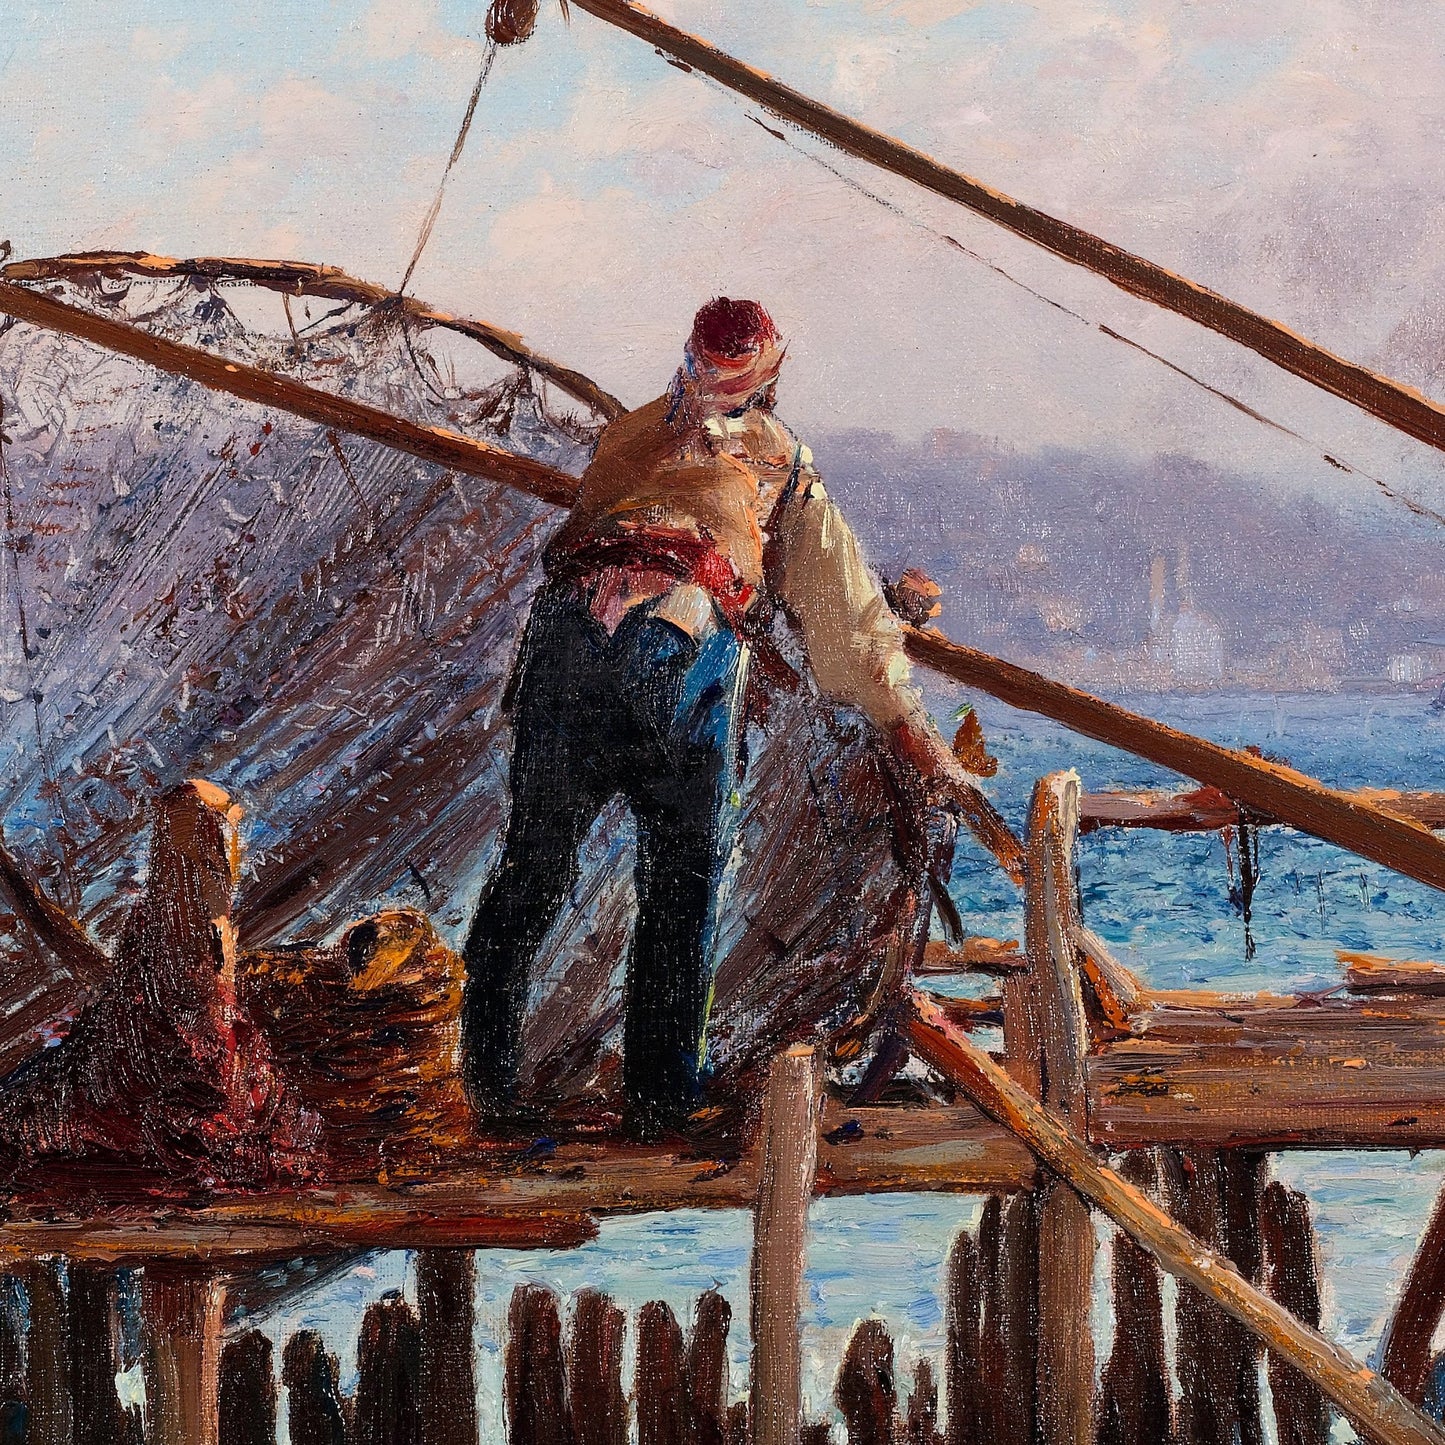 Fishermen Bringing in the Catch by Fausto Zonaro, 3d Printed with texture and brush strokes looks like original oil-painting, code:028